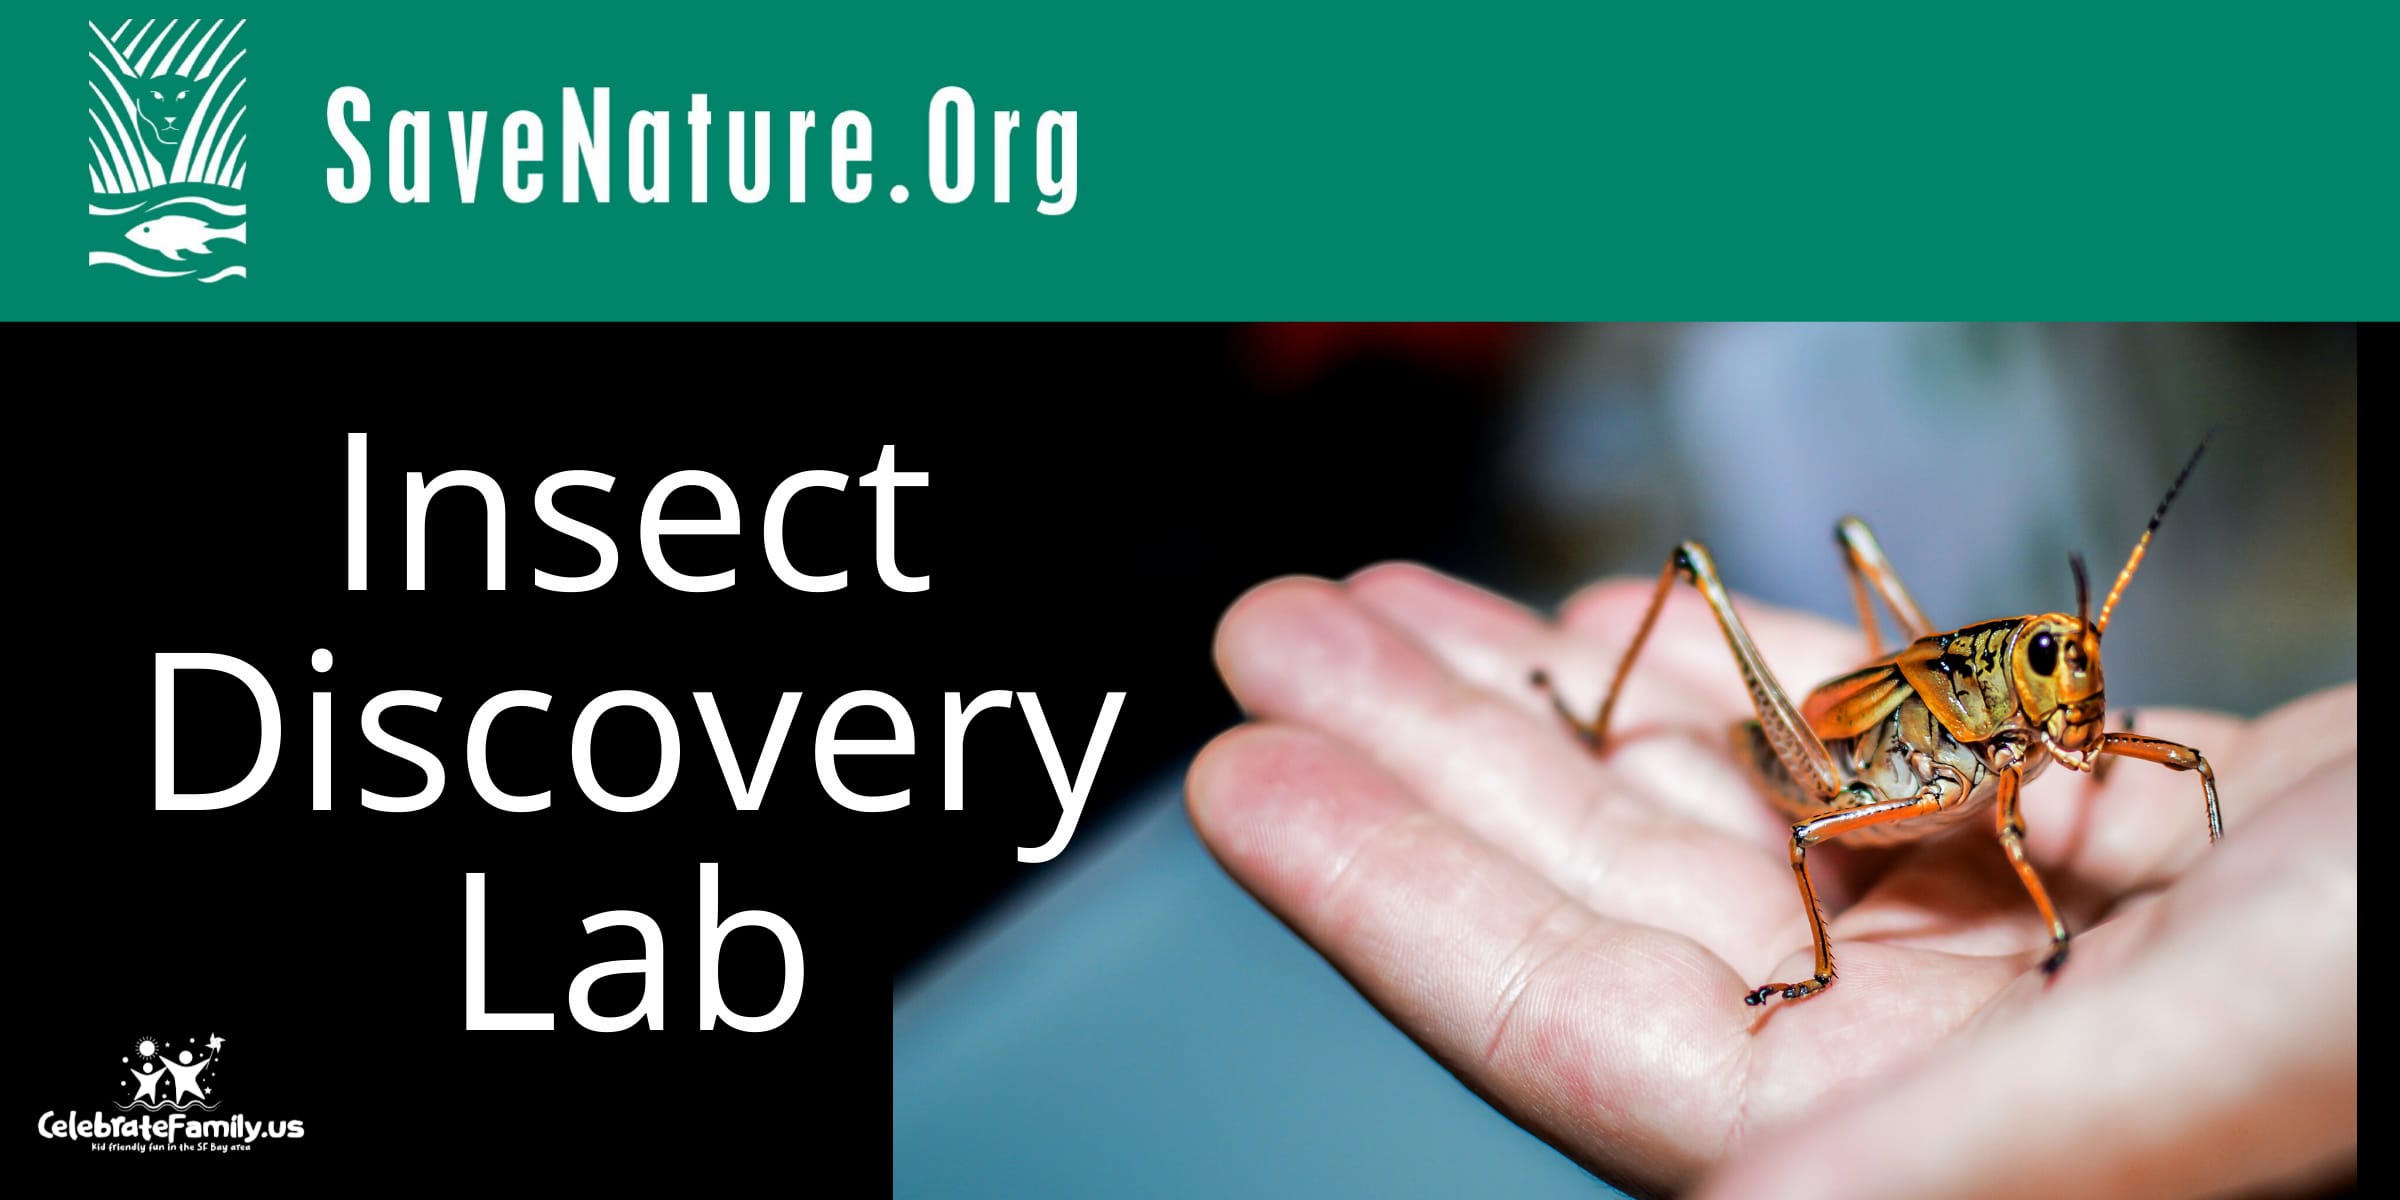 SaveNature.org Insect Discovery Lab